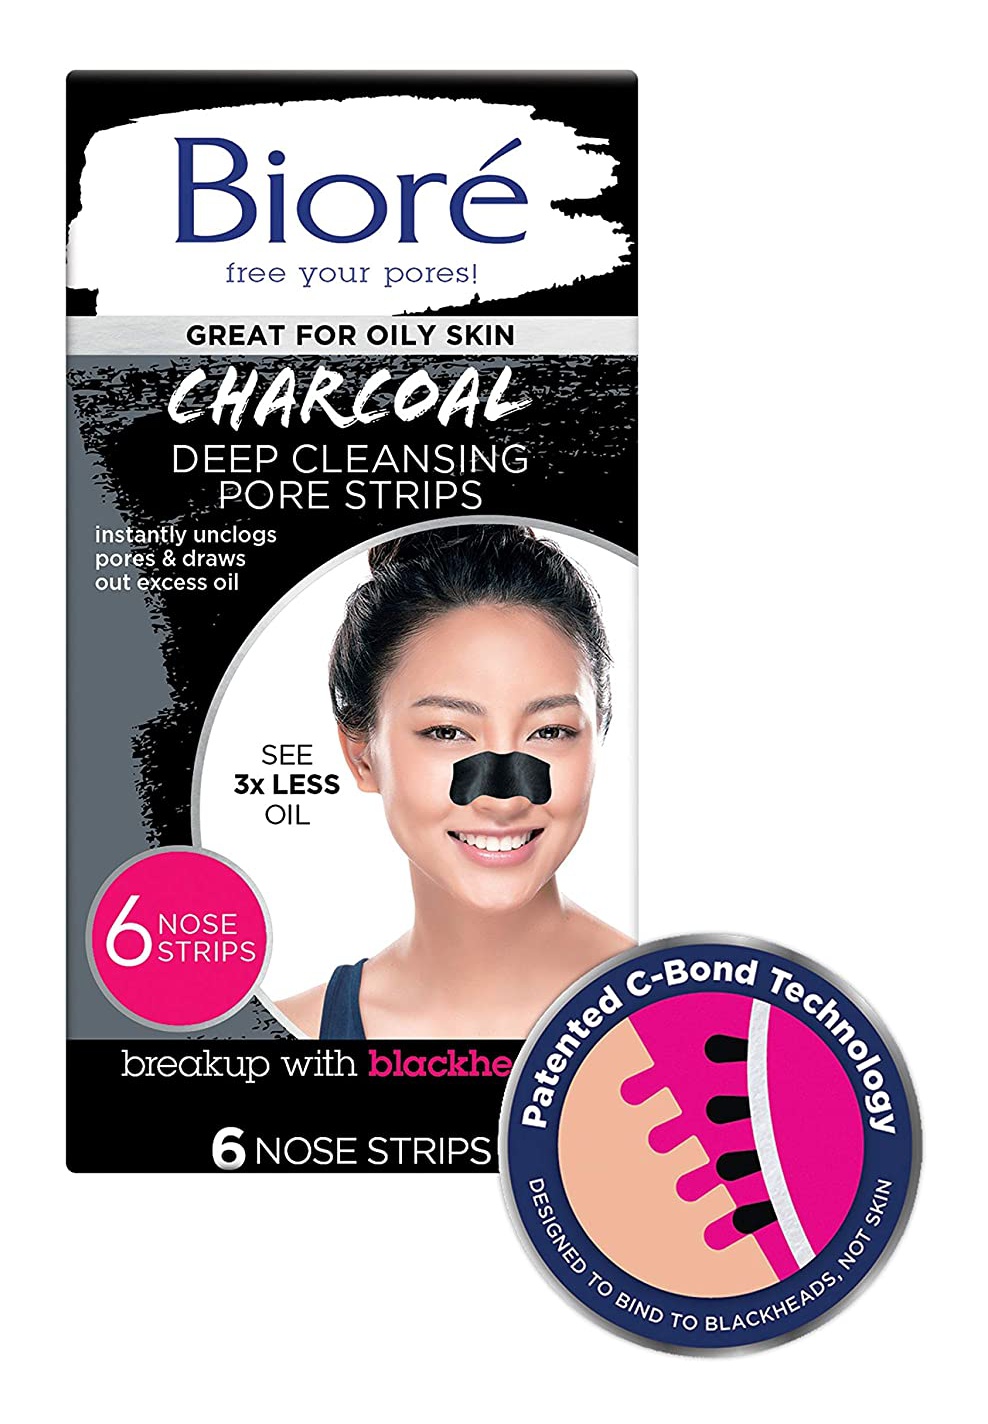 Biore Charcoal Deep Cleansing Pore Strips